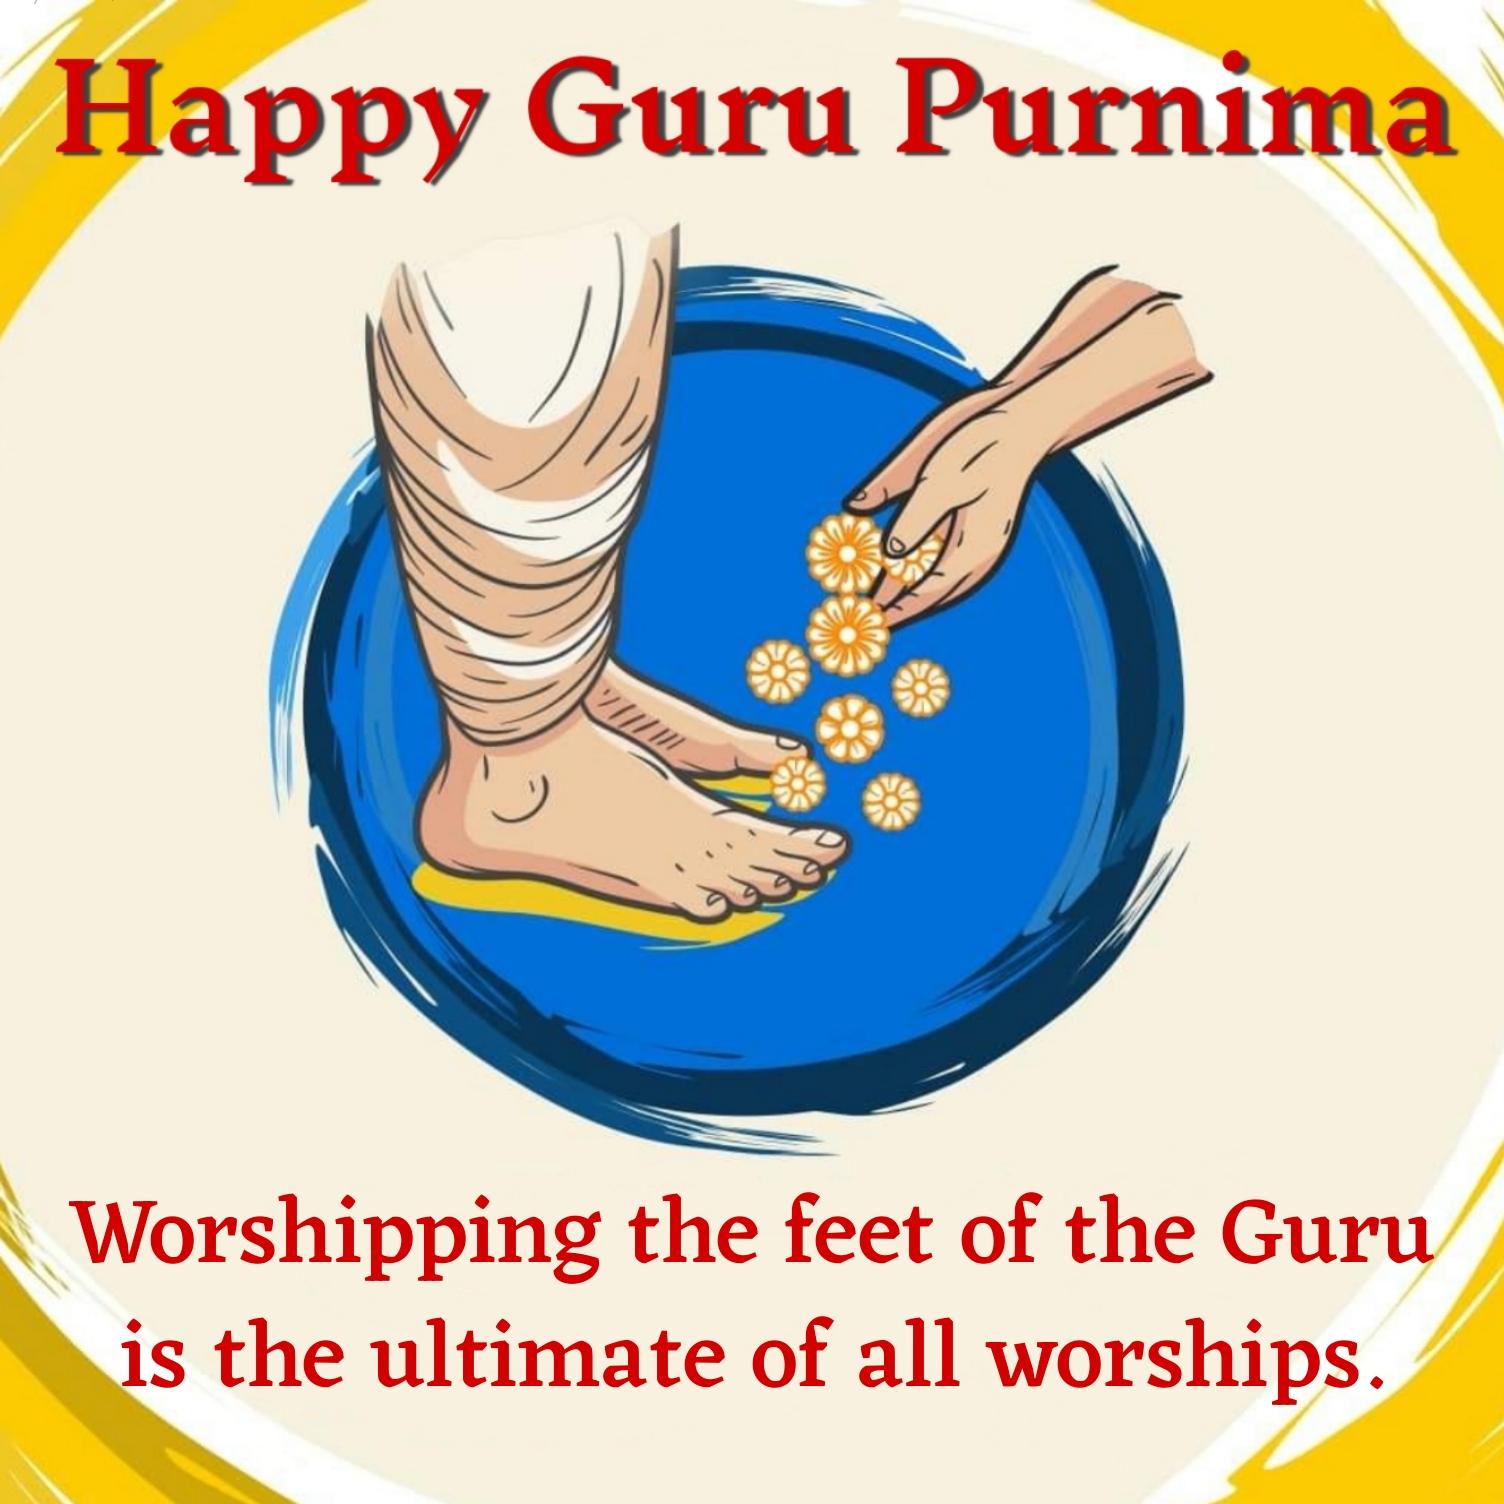 Worshipping the feet of the Guru is the ultimate of all worships